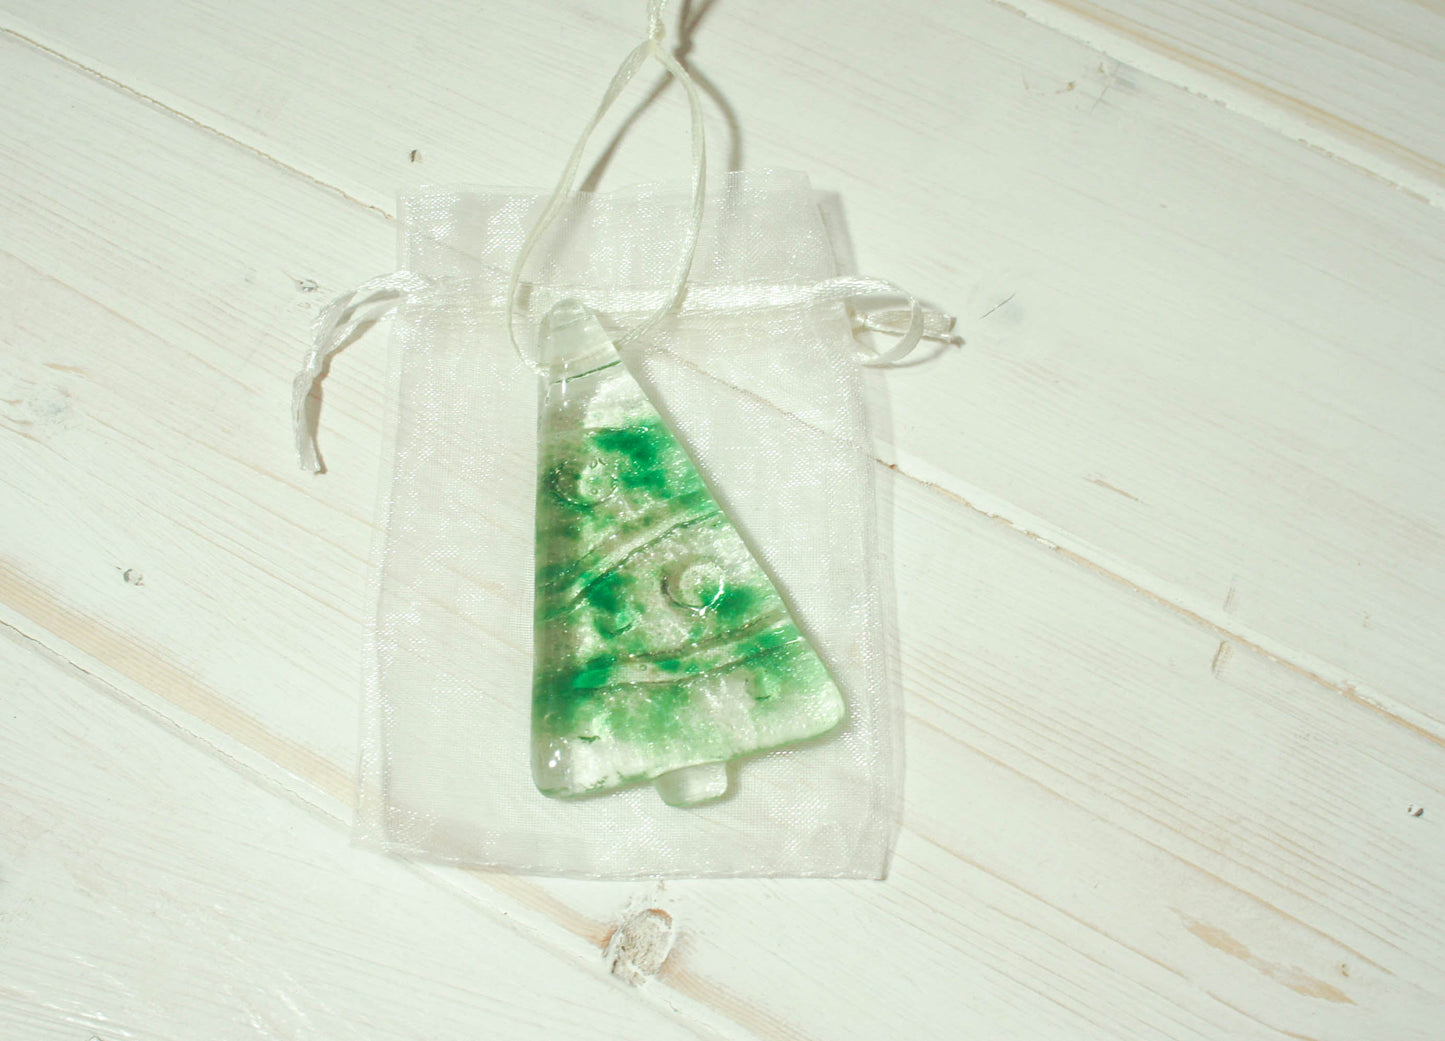 3 to 6 Mini Green Glass Trees - Hanging - 8cm(3") with ribbon and organza bags